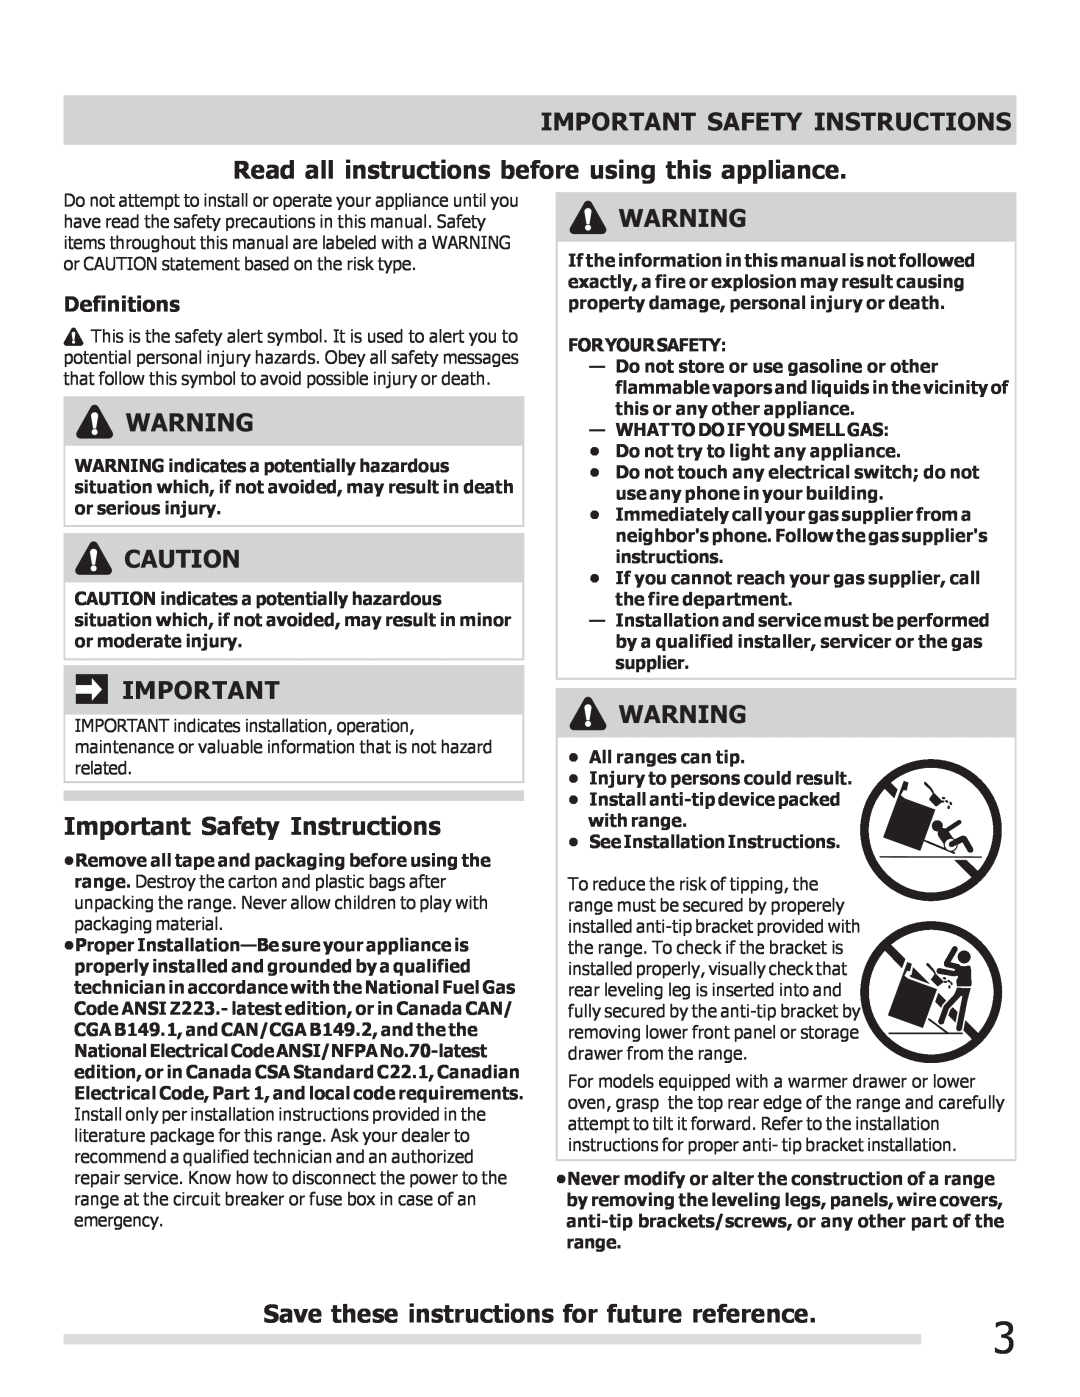 Frigidaire 316901309 Important Safety Instructions, Read all instructions before using this appliance, Definitions 